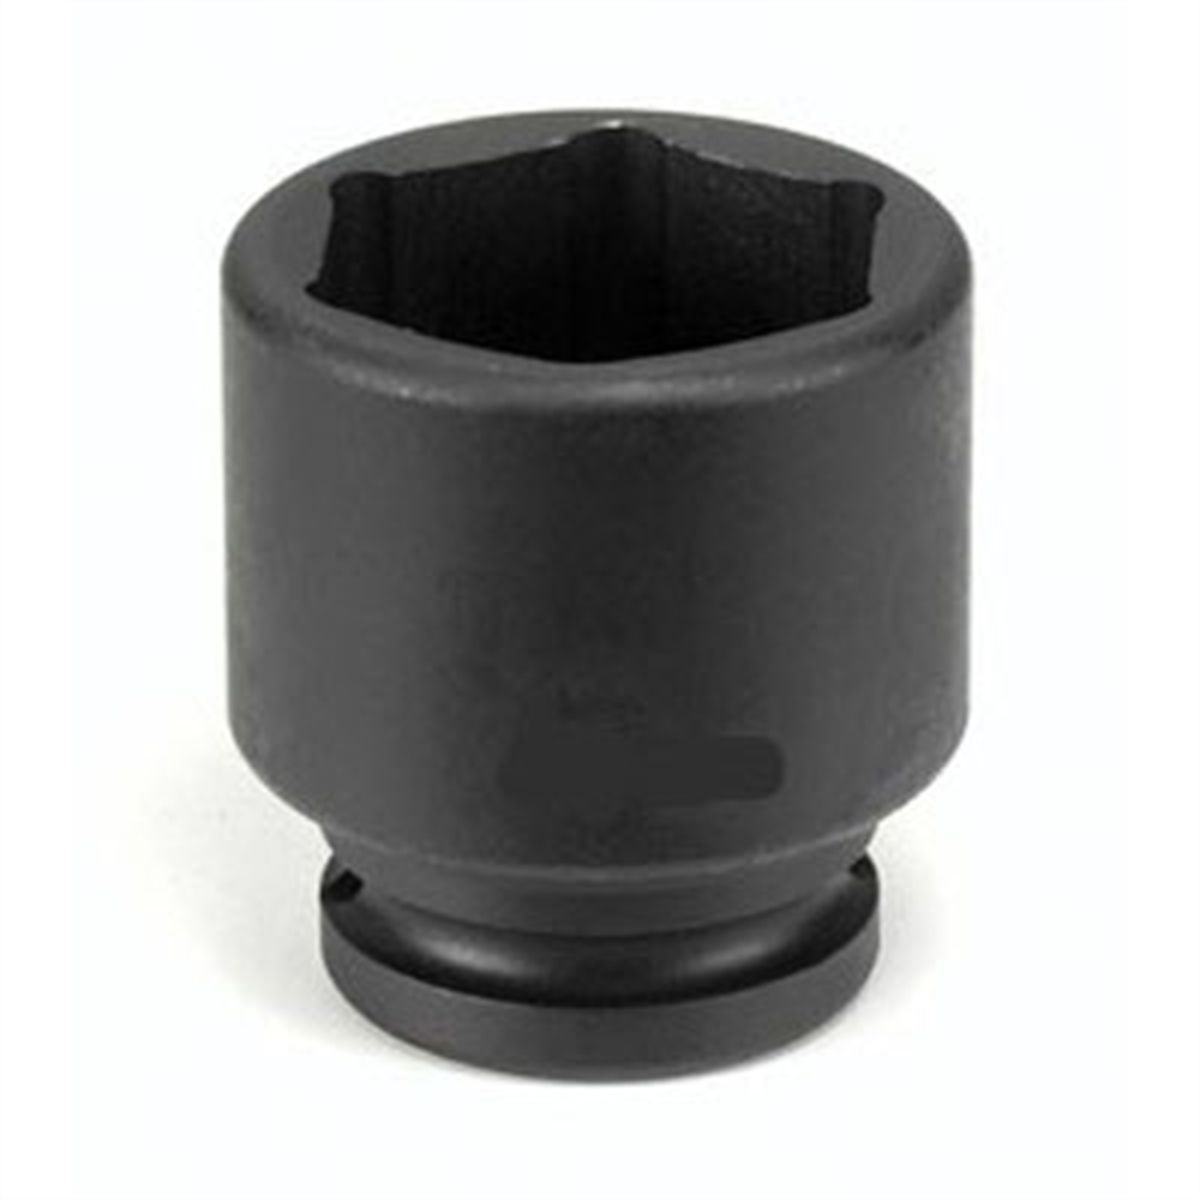 21MM 'IMPACT SOCKET 3/4"SQ DRIVE FOR USE ON AIR TOOLS 